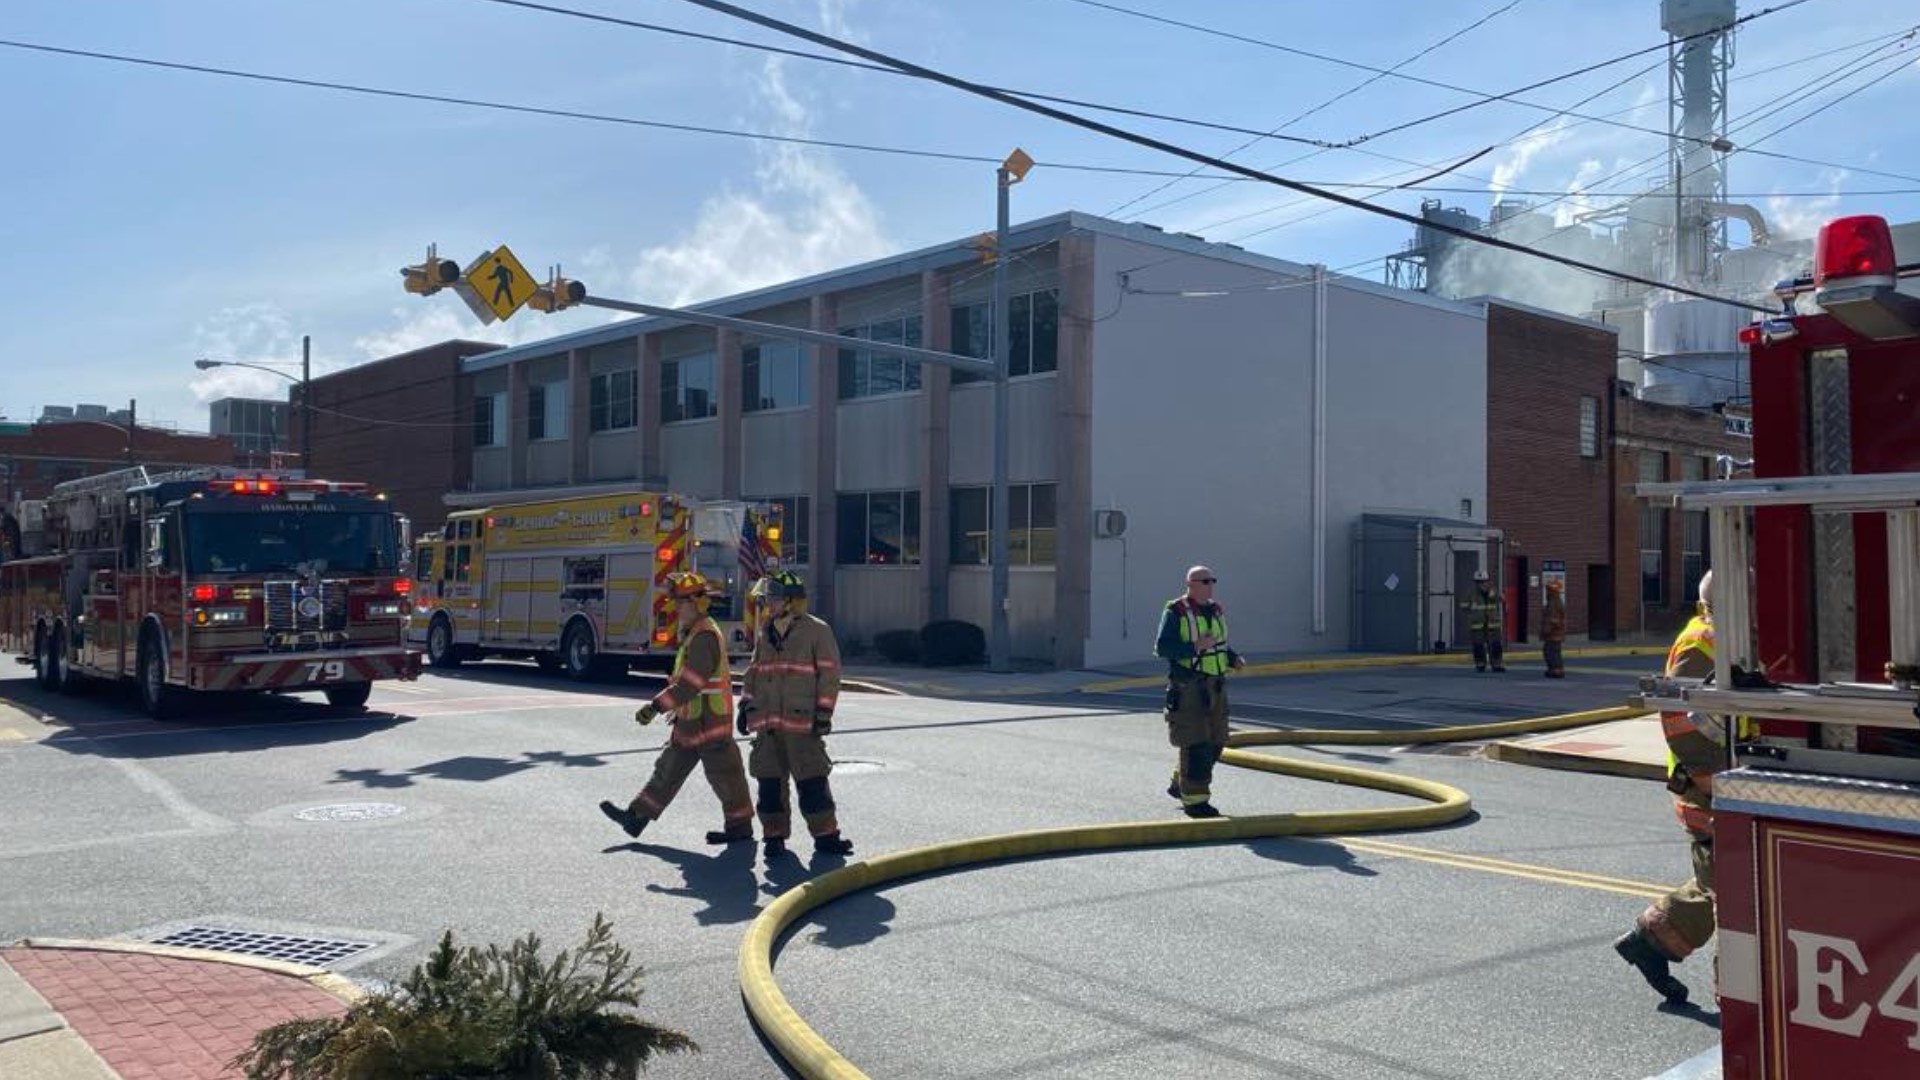 The blaze broke out at the Pixelle Speciality Solutions paper mill, prompting a response of more than a dozen fire departments.